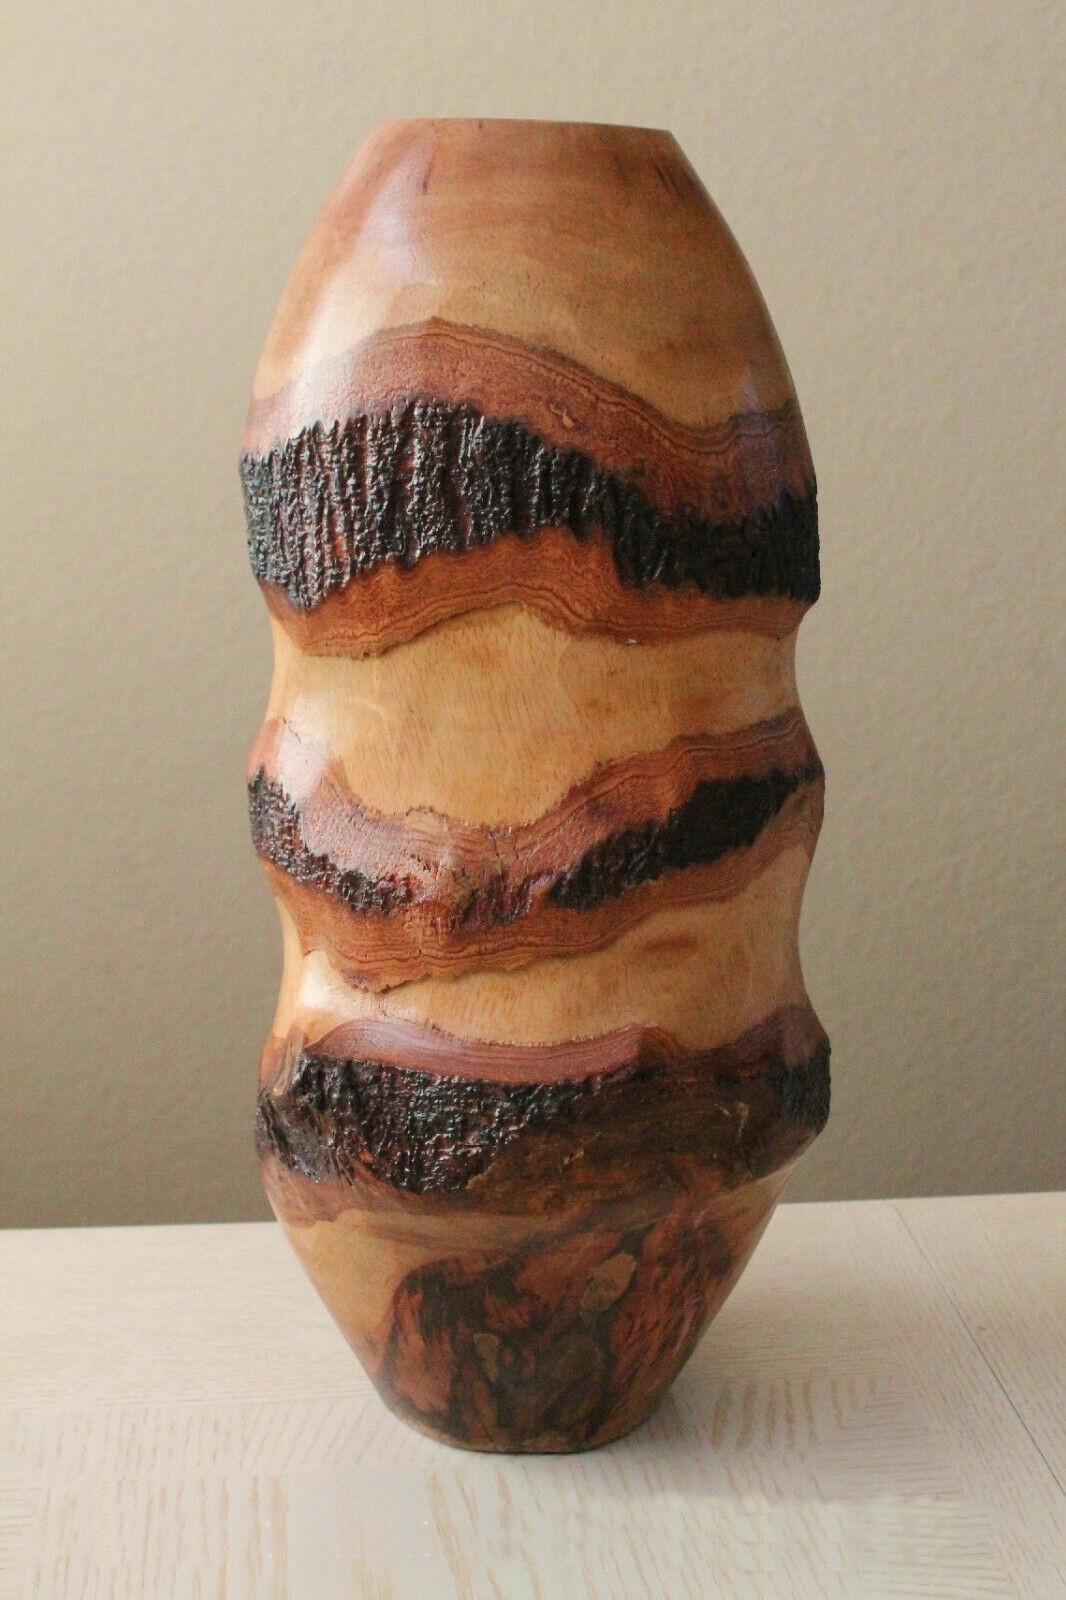 GORGEOUS!

MID CENTURY MODERN
LIVE-EDGE
CARVED WOOD POTTERY!

After George Nakashima

Dimensions: Height: 15